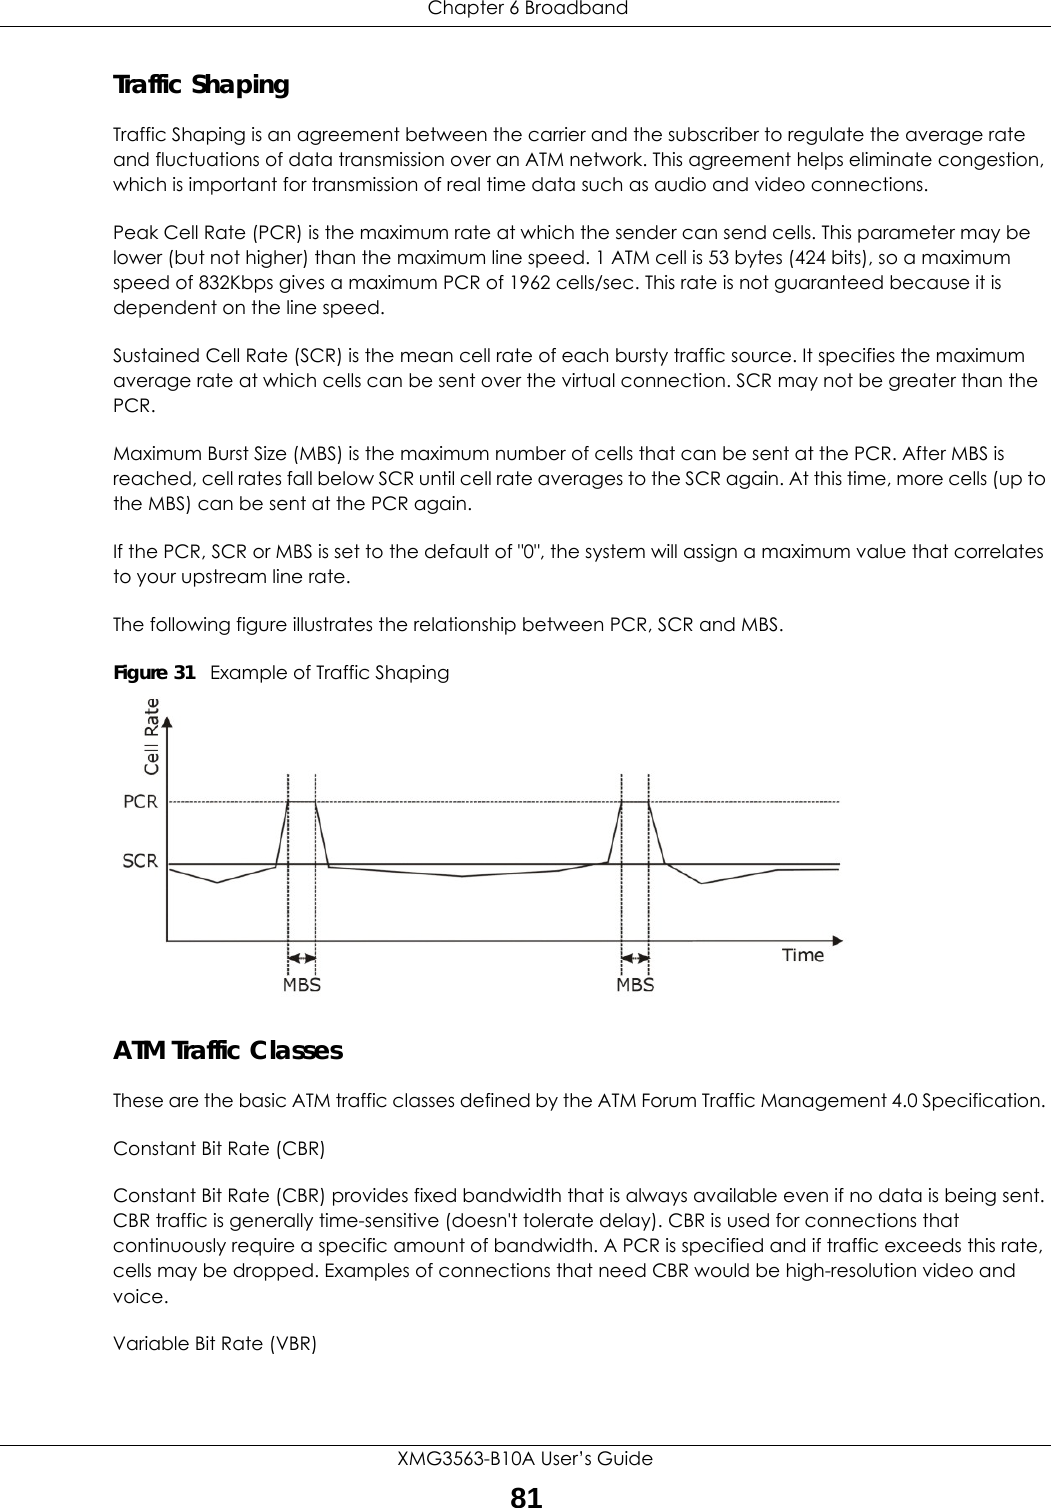  Chapter 6 BroadbandXMG3563-B10A User’s Guide81Traffic ShapingTraffic Shaping is an agreement between the carrier and the subscriber to regulate the average rate and fluctuations of data transmission over an ATM network. This agreement helps eliminate congestion, which is important for transmission of real time data such as audio and video connections.Peak Cell Rate (PCR) is the maximum rate at which the sender can send cells. This parameter may be lower (but not higher) than the maximum line speed. 1 ATM cell is 53 bytes (424 bits), so a maximum speed of 832Kbps gives a maximum PCR of 1962 cells/sec. This rate is not guaranteed because it is dependent on the line speed.Sustained Cell Rate (SCR) is the mean cell rate of each bursty traffic source. It specifies the maximum average rate at which cells can be sent over the virtual connection. SCR may not be greater than the PCR.Maximum Burst Size (MBS) is the maximum number of cells that can be sent at the PCR. After MBS is reached, cell rates fall below SCR until cell rate averages to the SCR again. At this time, more cells (up to the MBS) can be sent at the PCR again.If the PCR, SCR or MBS is set to the default of &quot;0&quot;, the system will assign a maximum value that correlates to your upstream line rate. The following figure illustrates the relationship between PCR, SCR and MBS. Figure 31   Example of Traffic ShapingATM Traffic ClassesThese are the basic ATM traffic classes defined by the ATM Forum Traffic Management 4.0 Specification. Constant Bit Rate (CBR)Constant Bit Rate (CBR) provides fixed bandwidth that is always available even if no data is being sent. CBR traffic is generally time-sensitive (doesn&apos;t tolerate delay). CBR is used for connections that continuously require a specific amount of bandwidth. A PCR is specified and if traffic exceeds this rate, cells may be dropped. Examples of connections that need CBR would be high-resolution video and voice.Variable Bit Rate (VBR) 